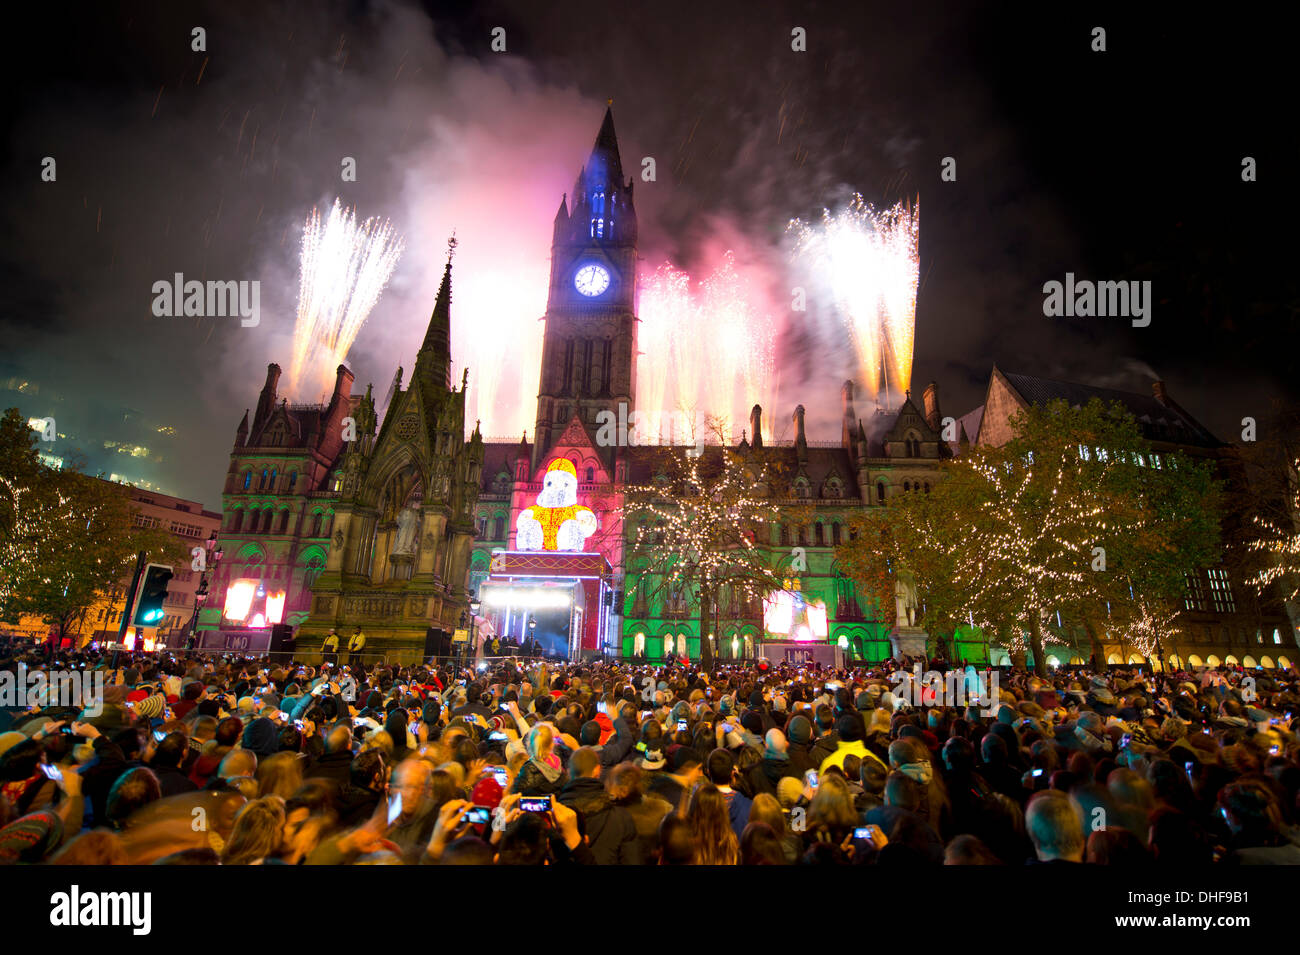 Manchester, UK. 8th November 2013. Revellers flock to Manchester's Albert Square to watch the city's annual Christmas lights switch on in front of the Town Hall. The lights were switched on by ninth X Factor winner James Arthur, who won the talent competition in 2012, along with The Vamps. Credit:  Russell Hart/Alamy Live News. Stock Photo